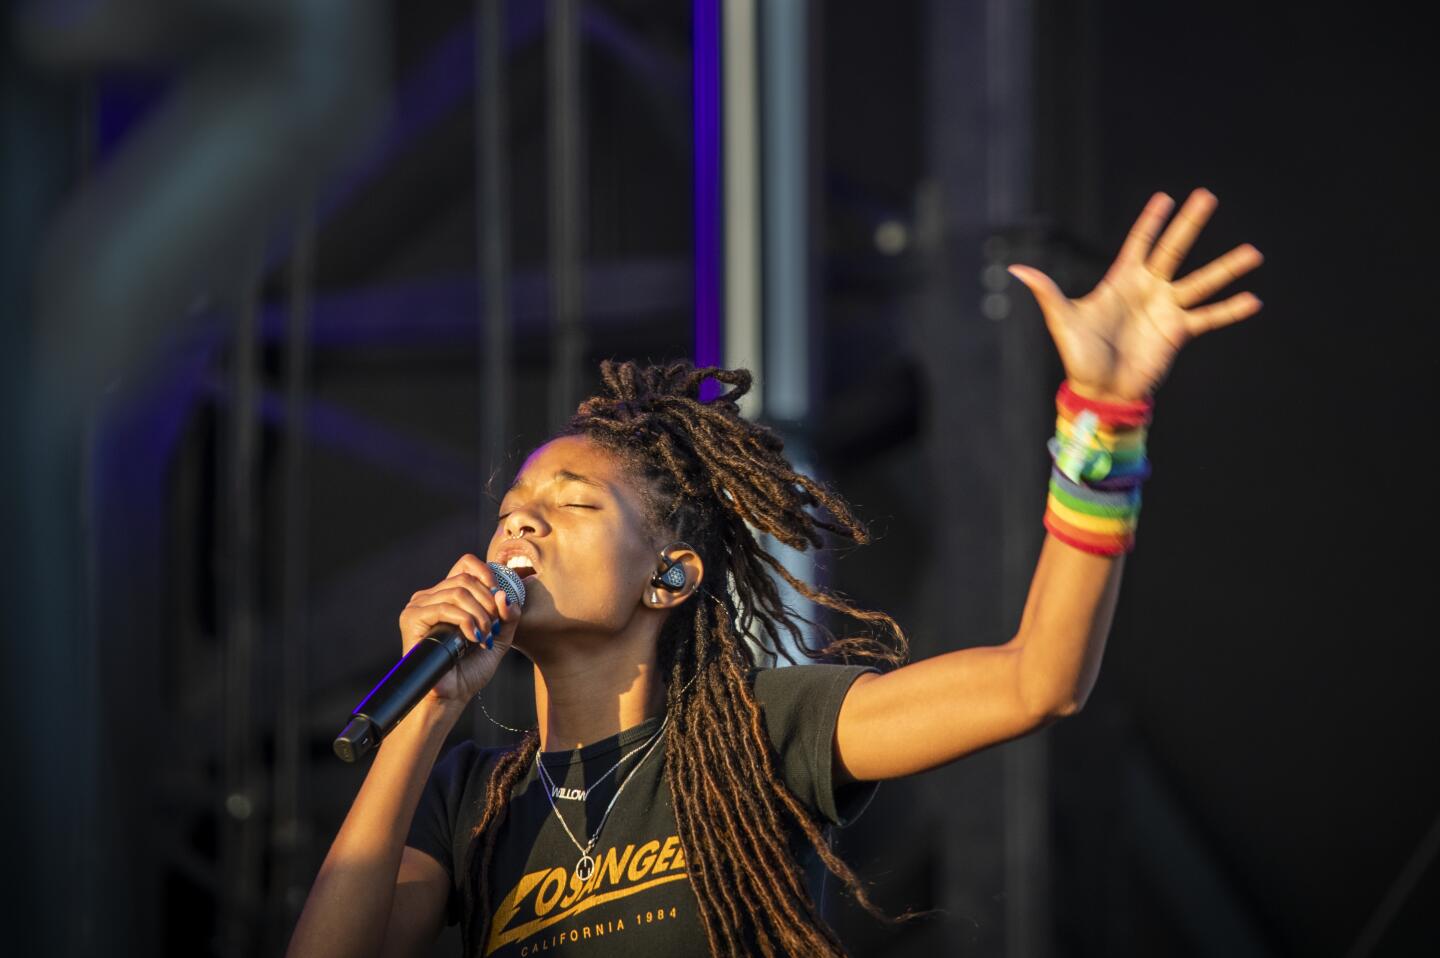 LOS ANGELES, CALIF. -- SUNDAY, NOVEMBER 10, 2019: Willow Smith performs on the Flog stage during Day 2 of the Camp Flog Gnaw Carnival at Dodger Stadium parking lot in Los Angeles, Calif., on Nov. 10, 2019. (Allen J. Schaben / Los Angeles Times)